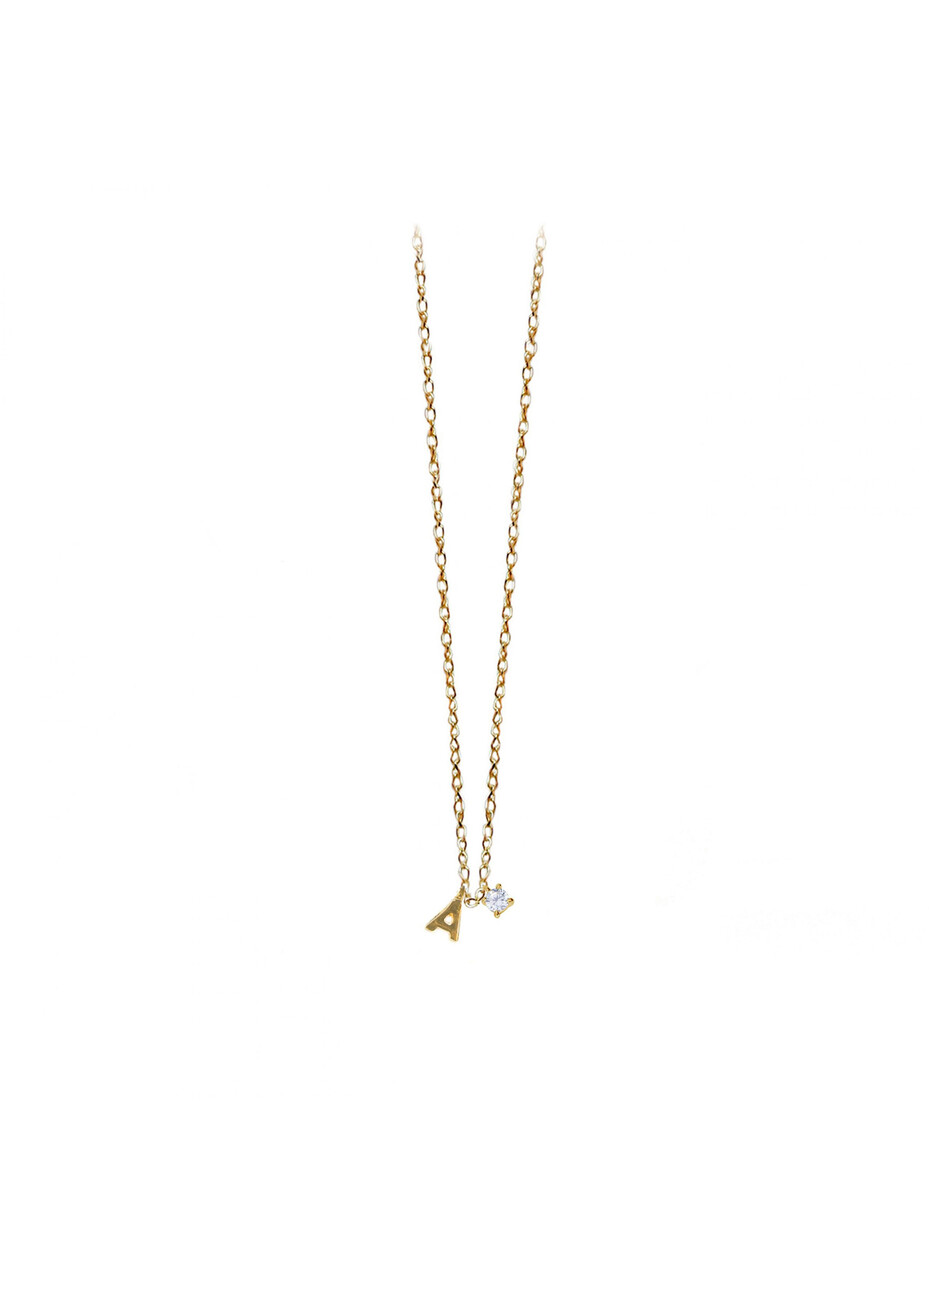 Clarity letter necklace in 18kt solid gold